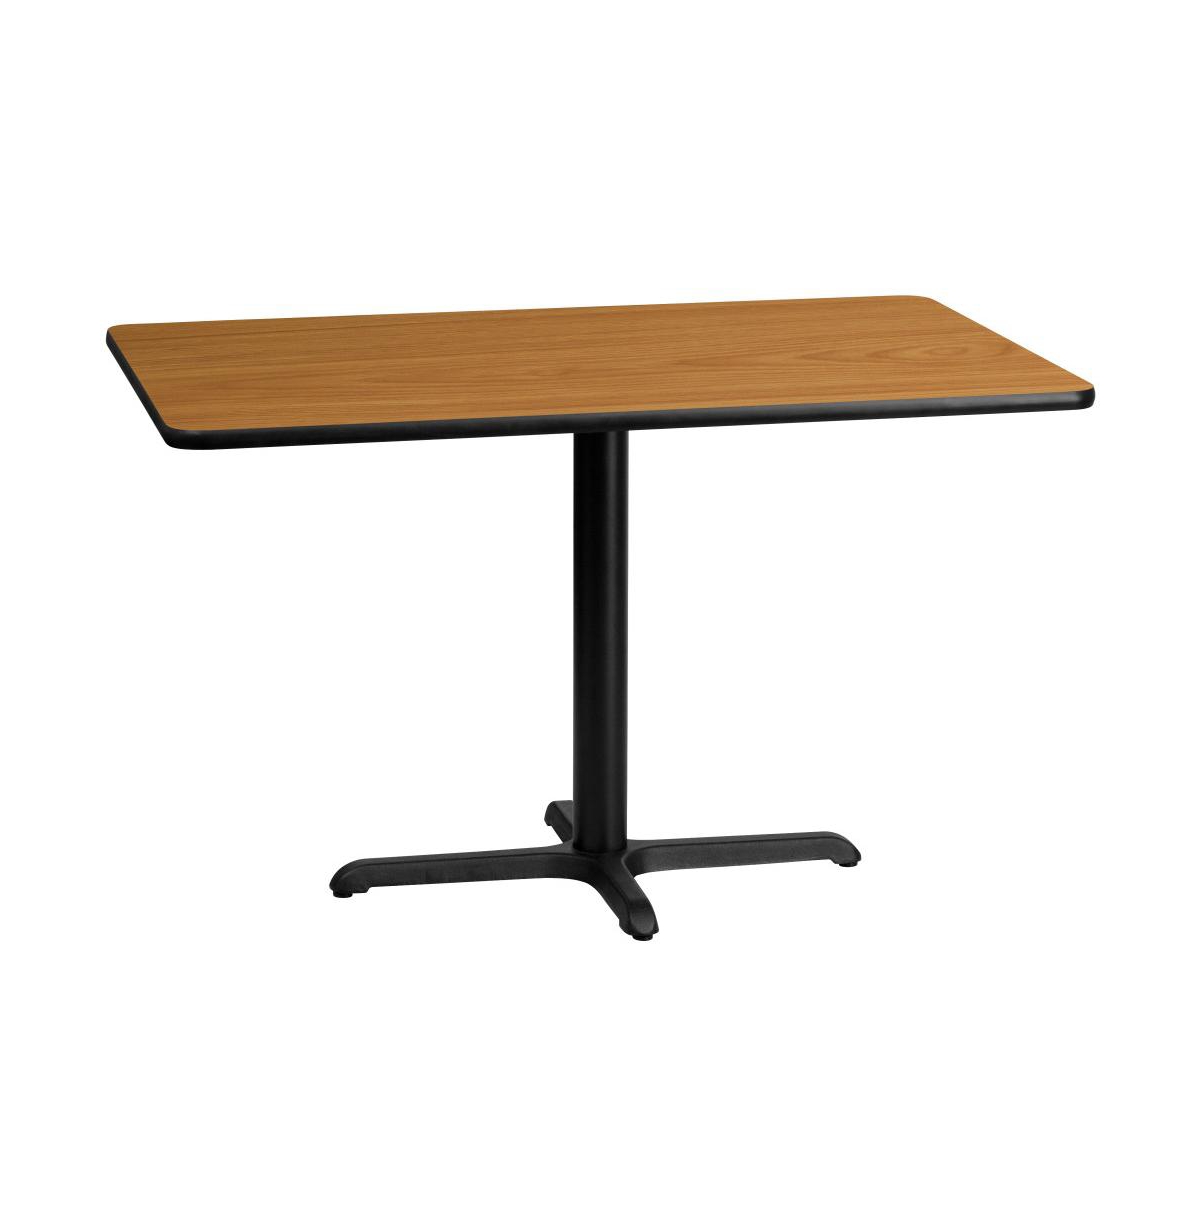 Emma+oliver 30"x48" Rectangular Laminate Table With 23.5"x29.5" Table Height Base In Natural